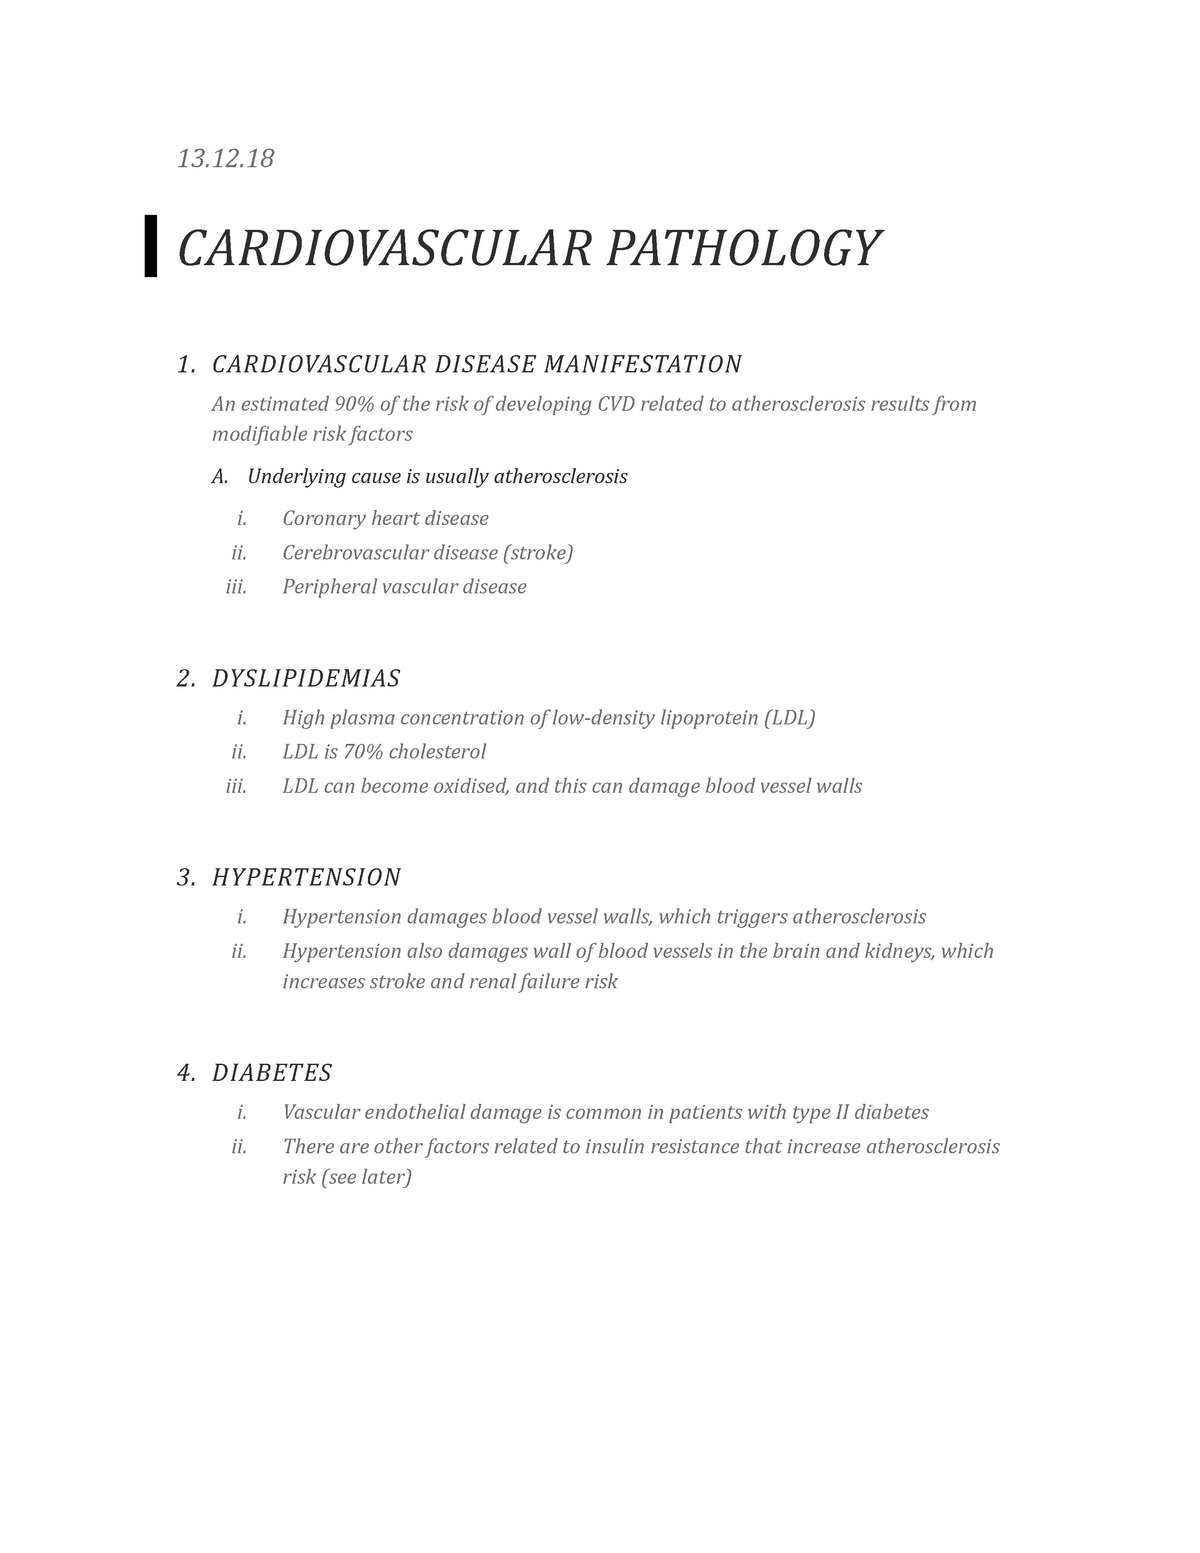 cardiology thesis pdf